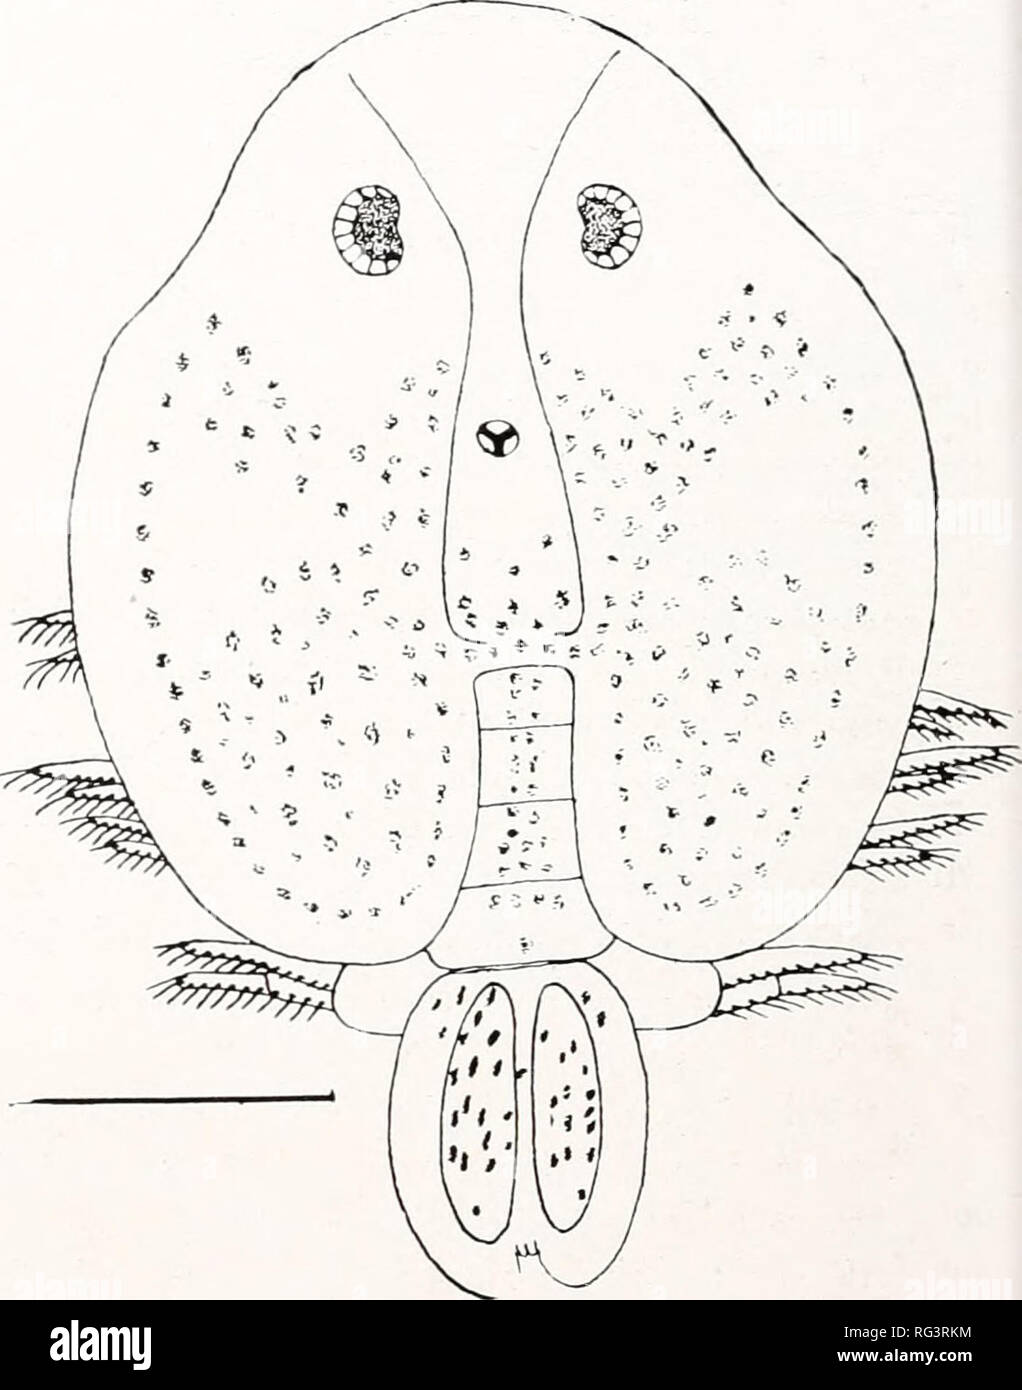 . The Canadian field-naturalist. Fig. 4. Argulus piperatus: maxillijied of male: much enlarged. The maxillipeds are rather short but stout; the triangular plate on their base is wide posteriorly and much narrowed anteriorly, but extends to the anterior margin of the appendage; the teeth are long and wide and bluntly rounded. Inside of the base of the appendage, on the ventral surface of the head, is an accessory tooth of the same pattern as those on the plate itself. The rami of the swimming legs reach consider- ably beyond the margin of the carapace. The lobes en the basal joints of the fourt Stock Photo